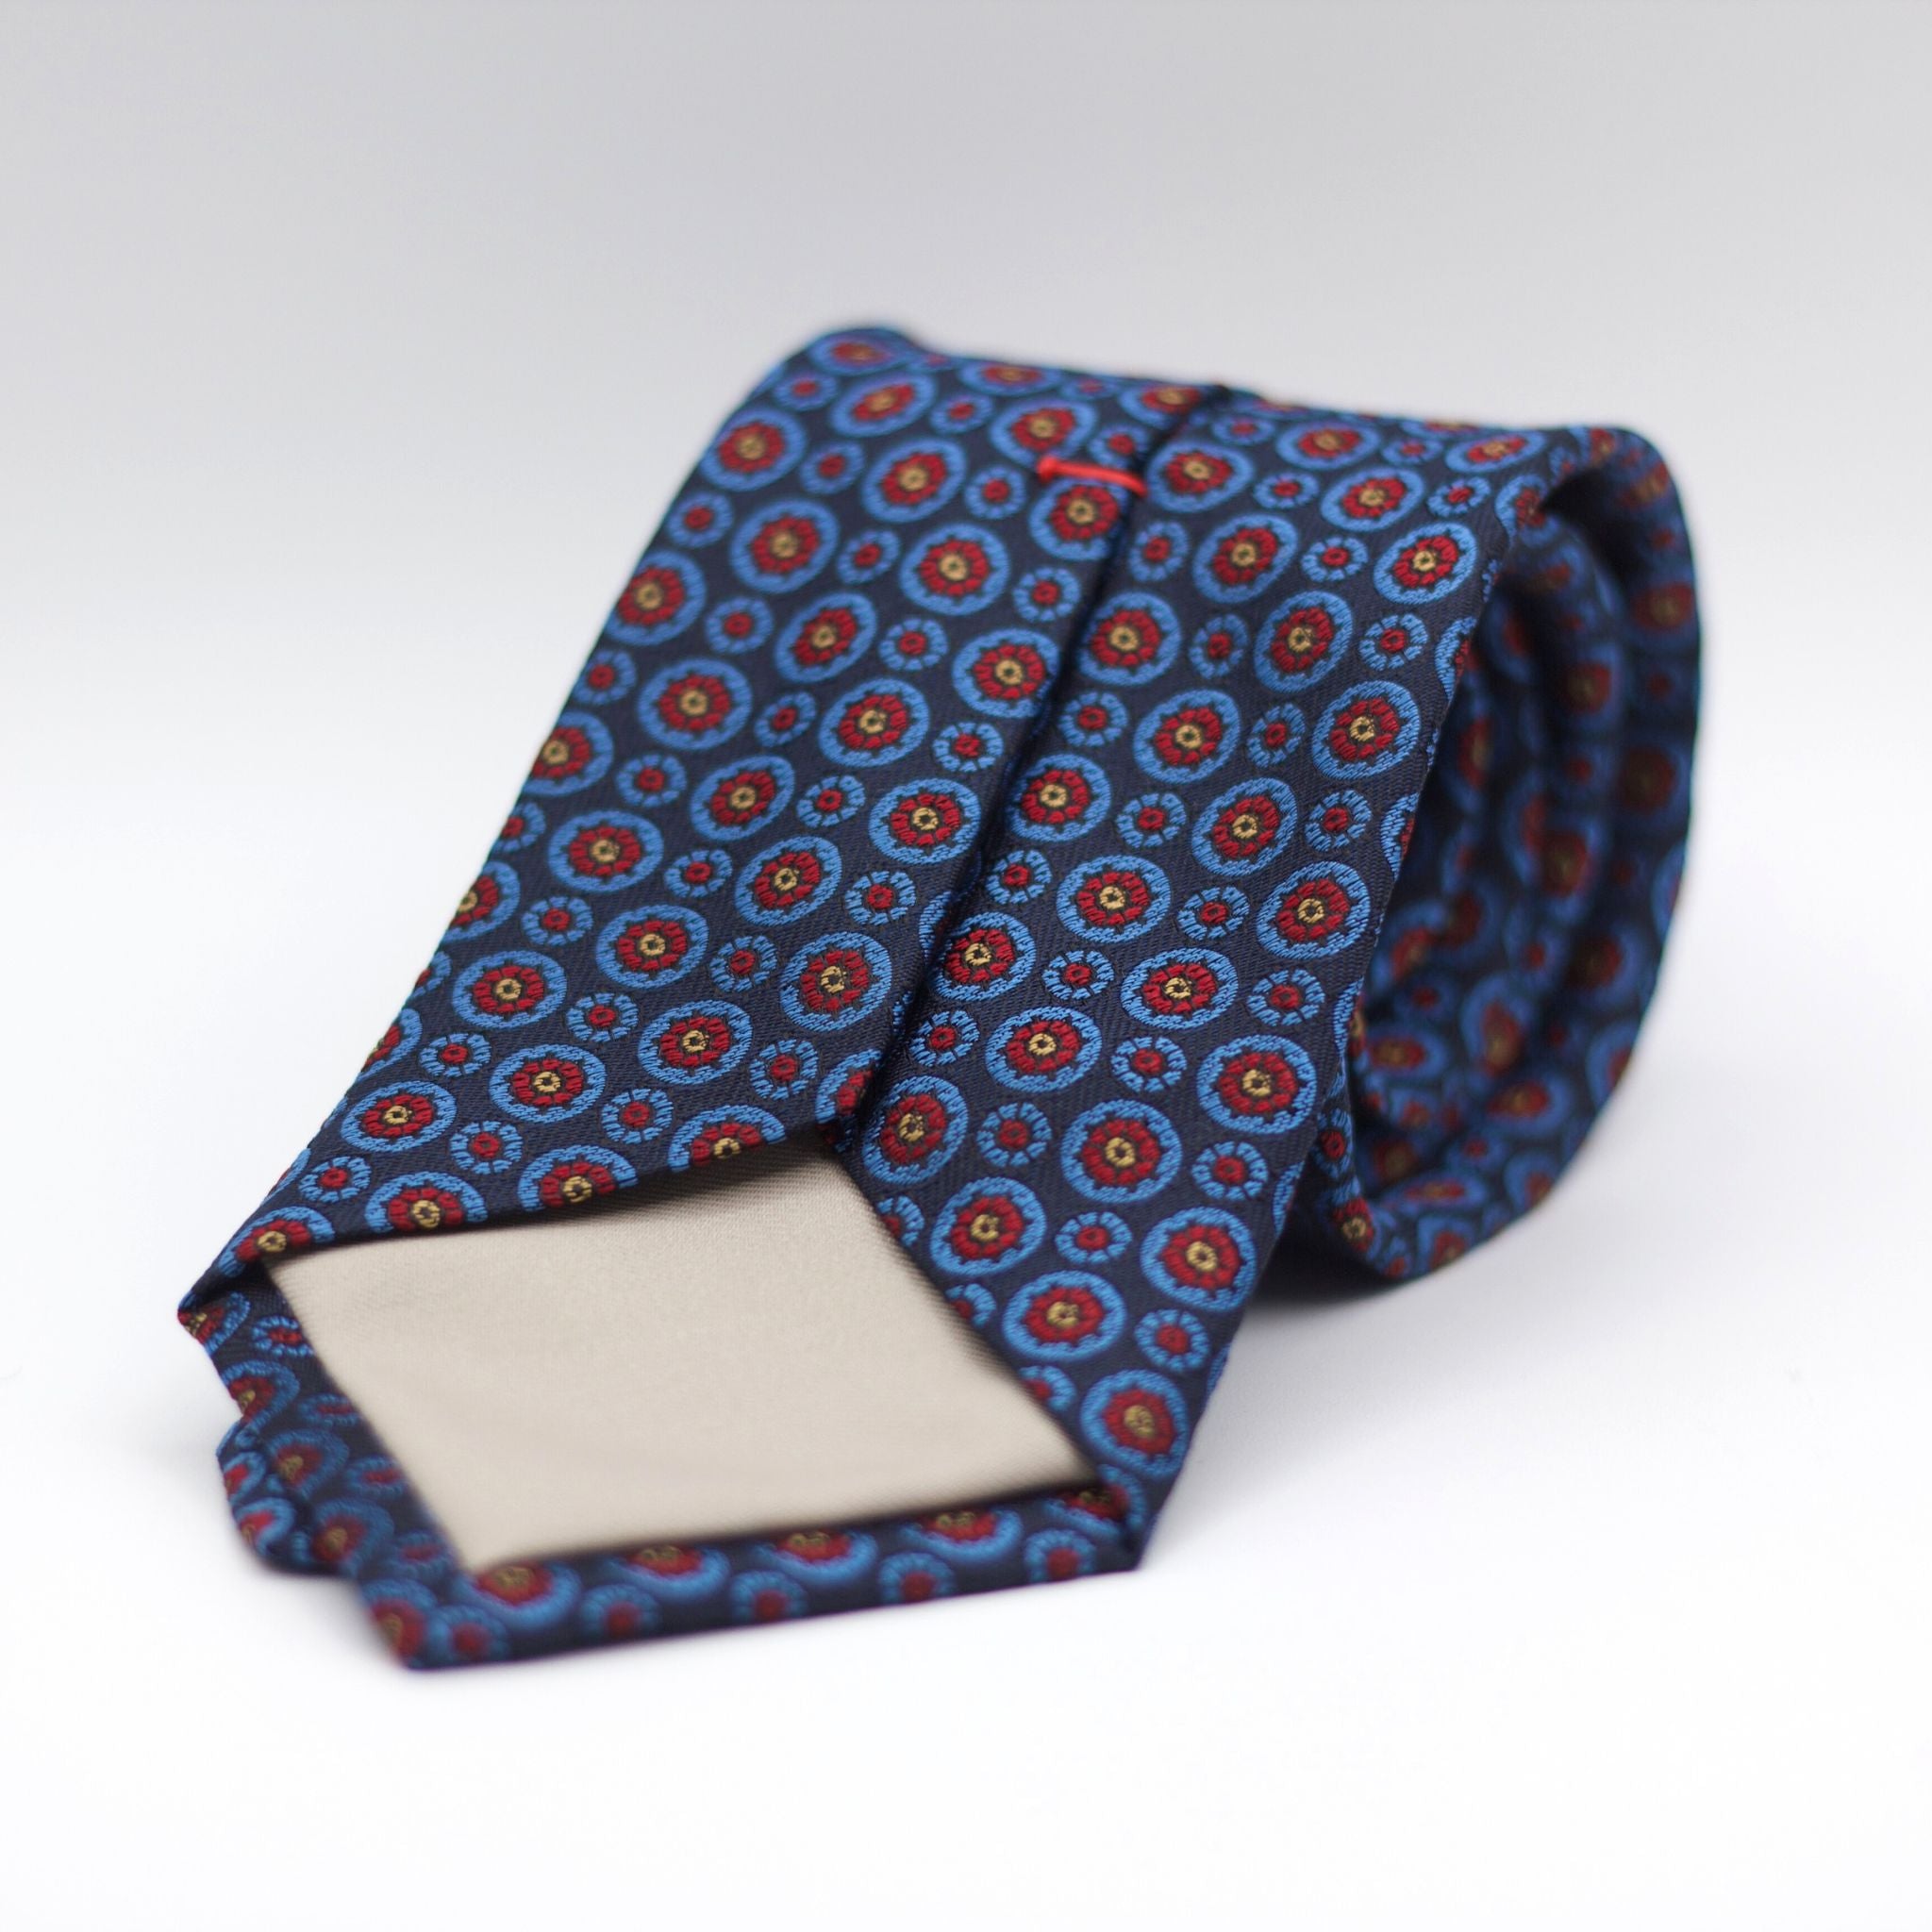 Cruciani & Bella 100% Silk Made in England Jacquard  Tipped Blue, Light Blue and Red Tie Handmade in Italy 8 cm x 150 cm